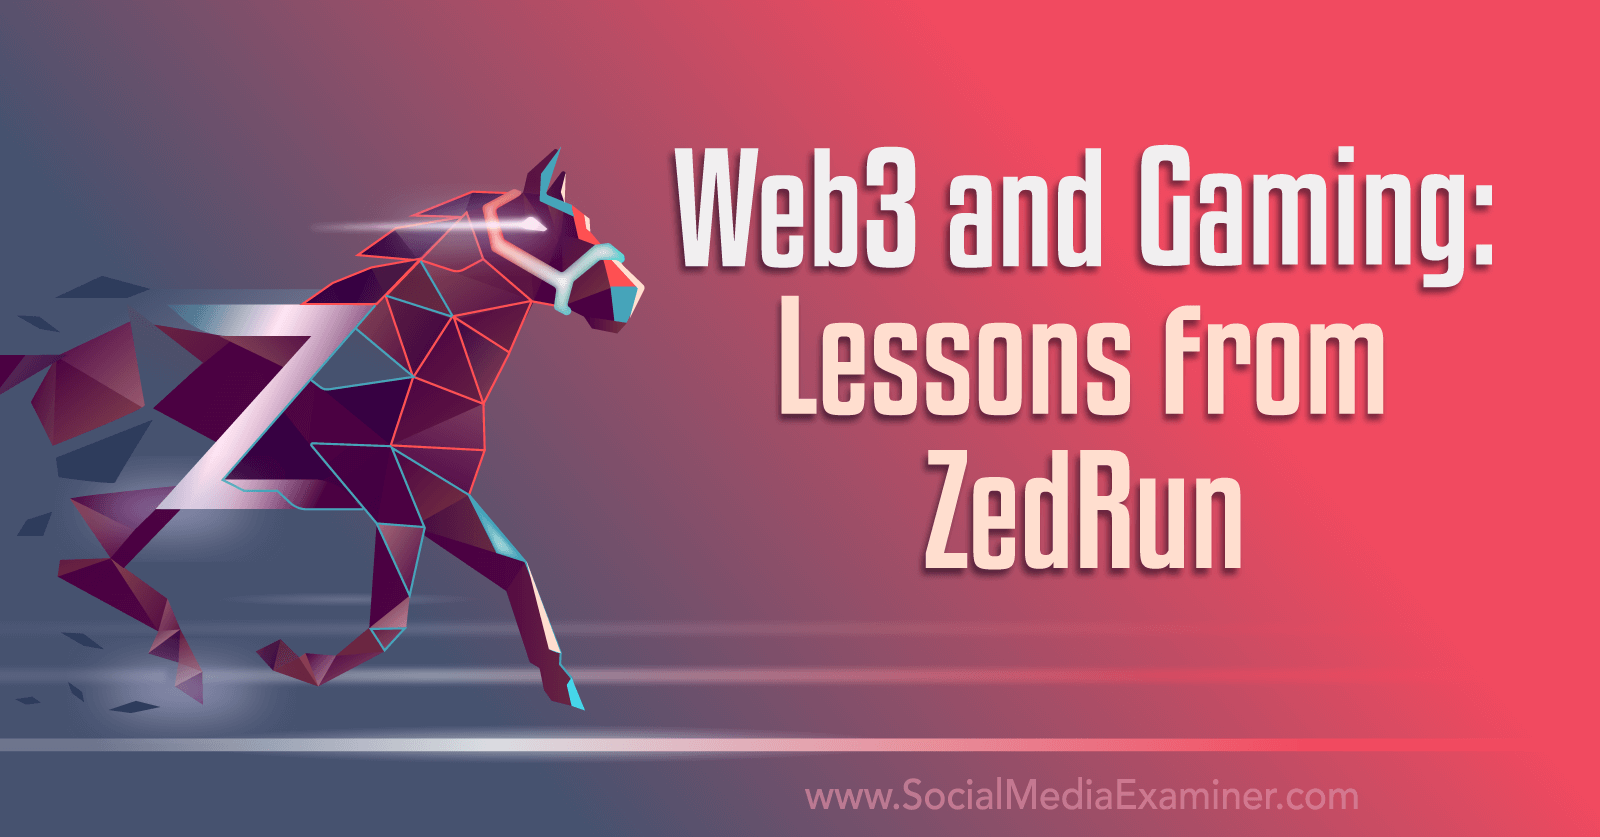 web3 and gaming lessons from zed run by social media examiner